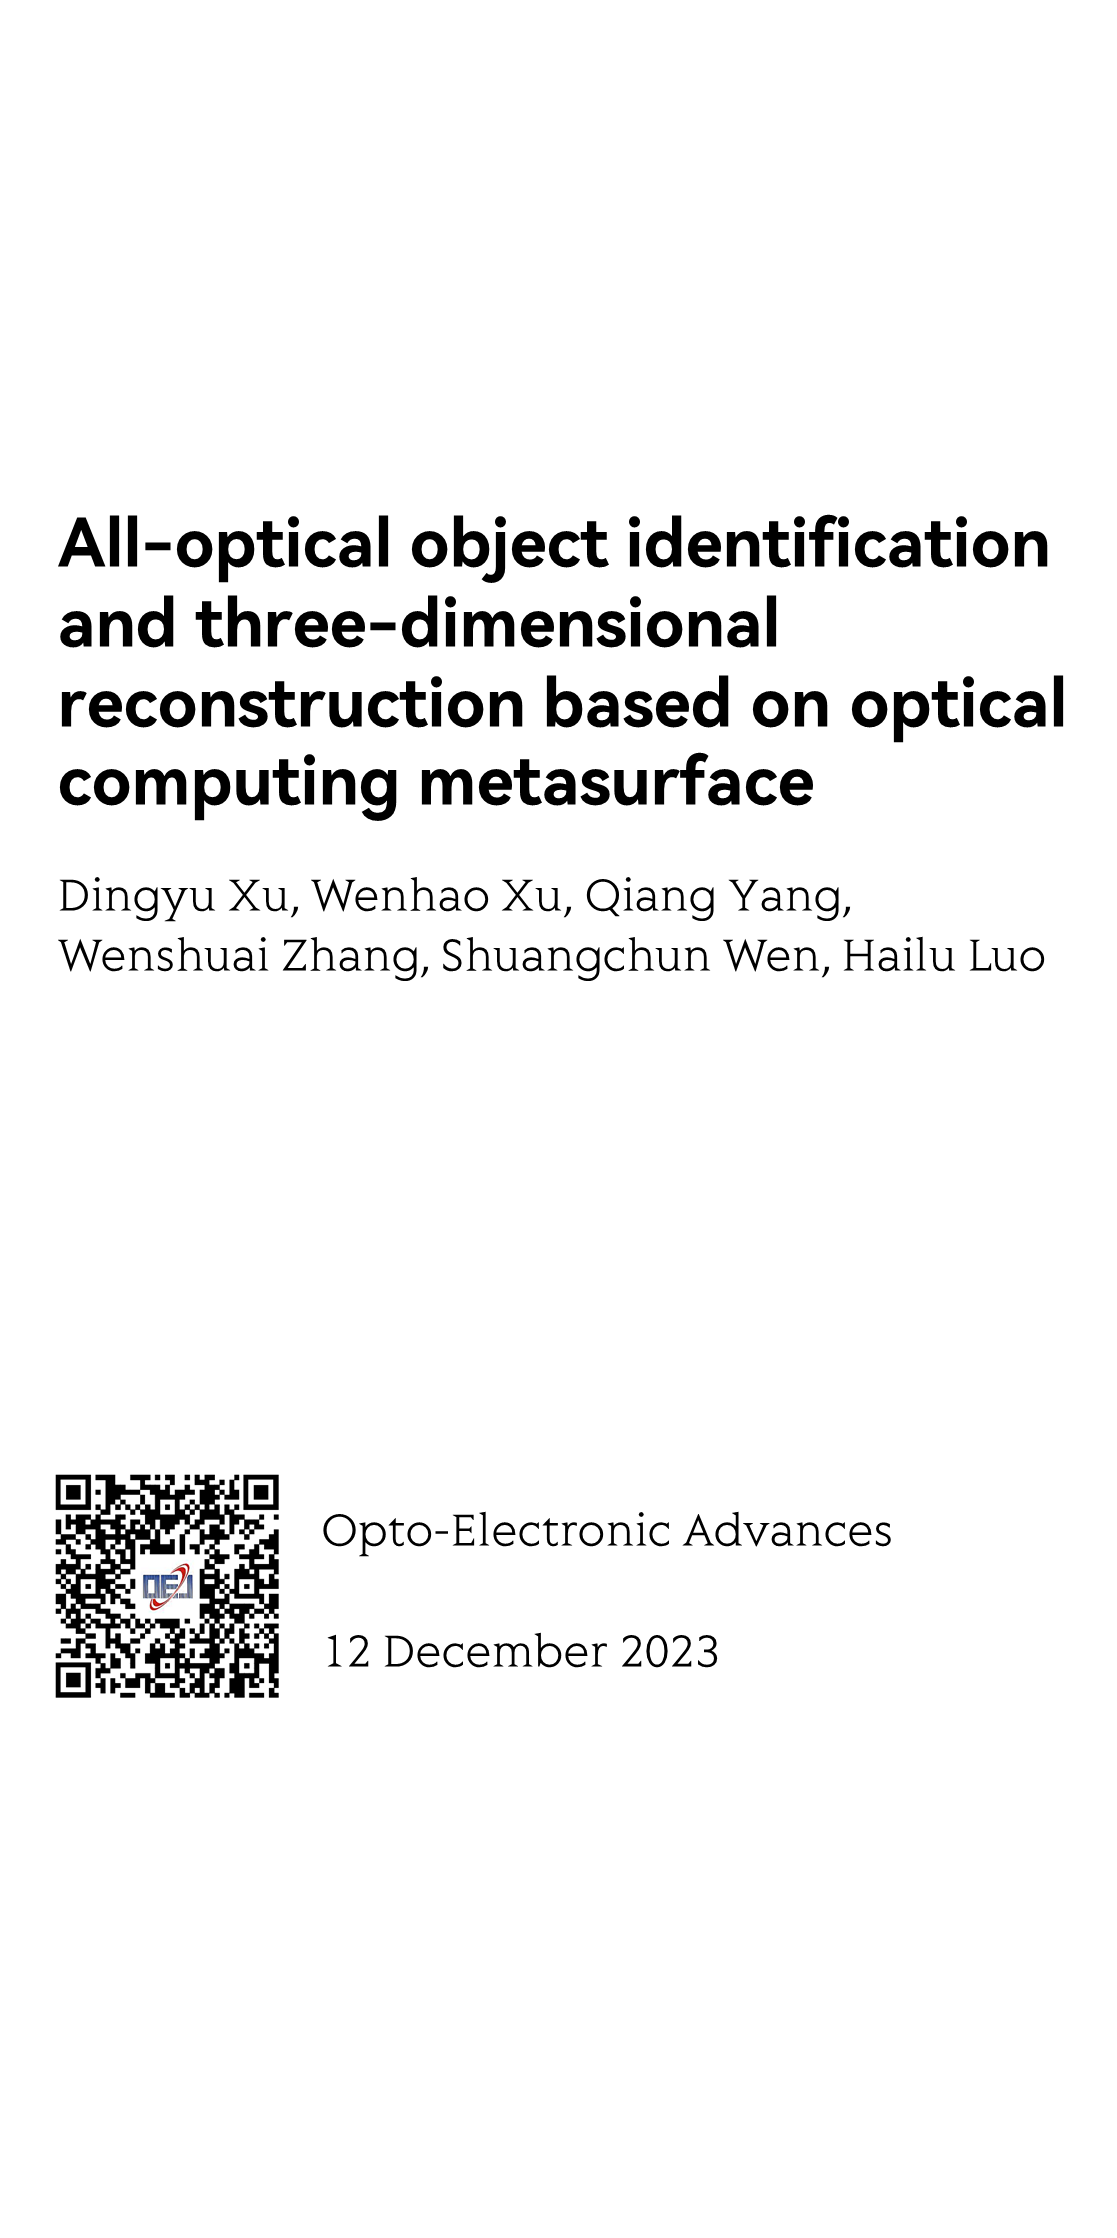 All-optical object identification and three-dimensional reconstruction based on optical computing metasurface_1